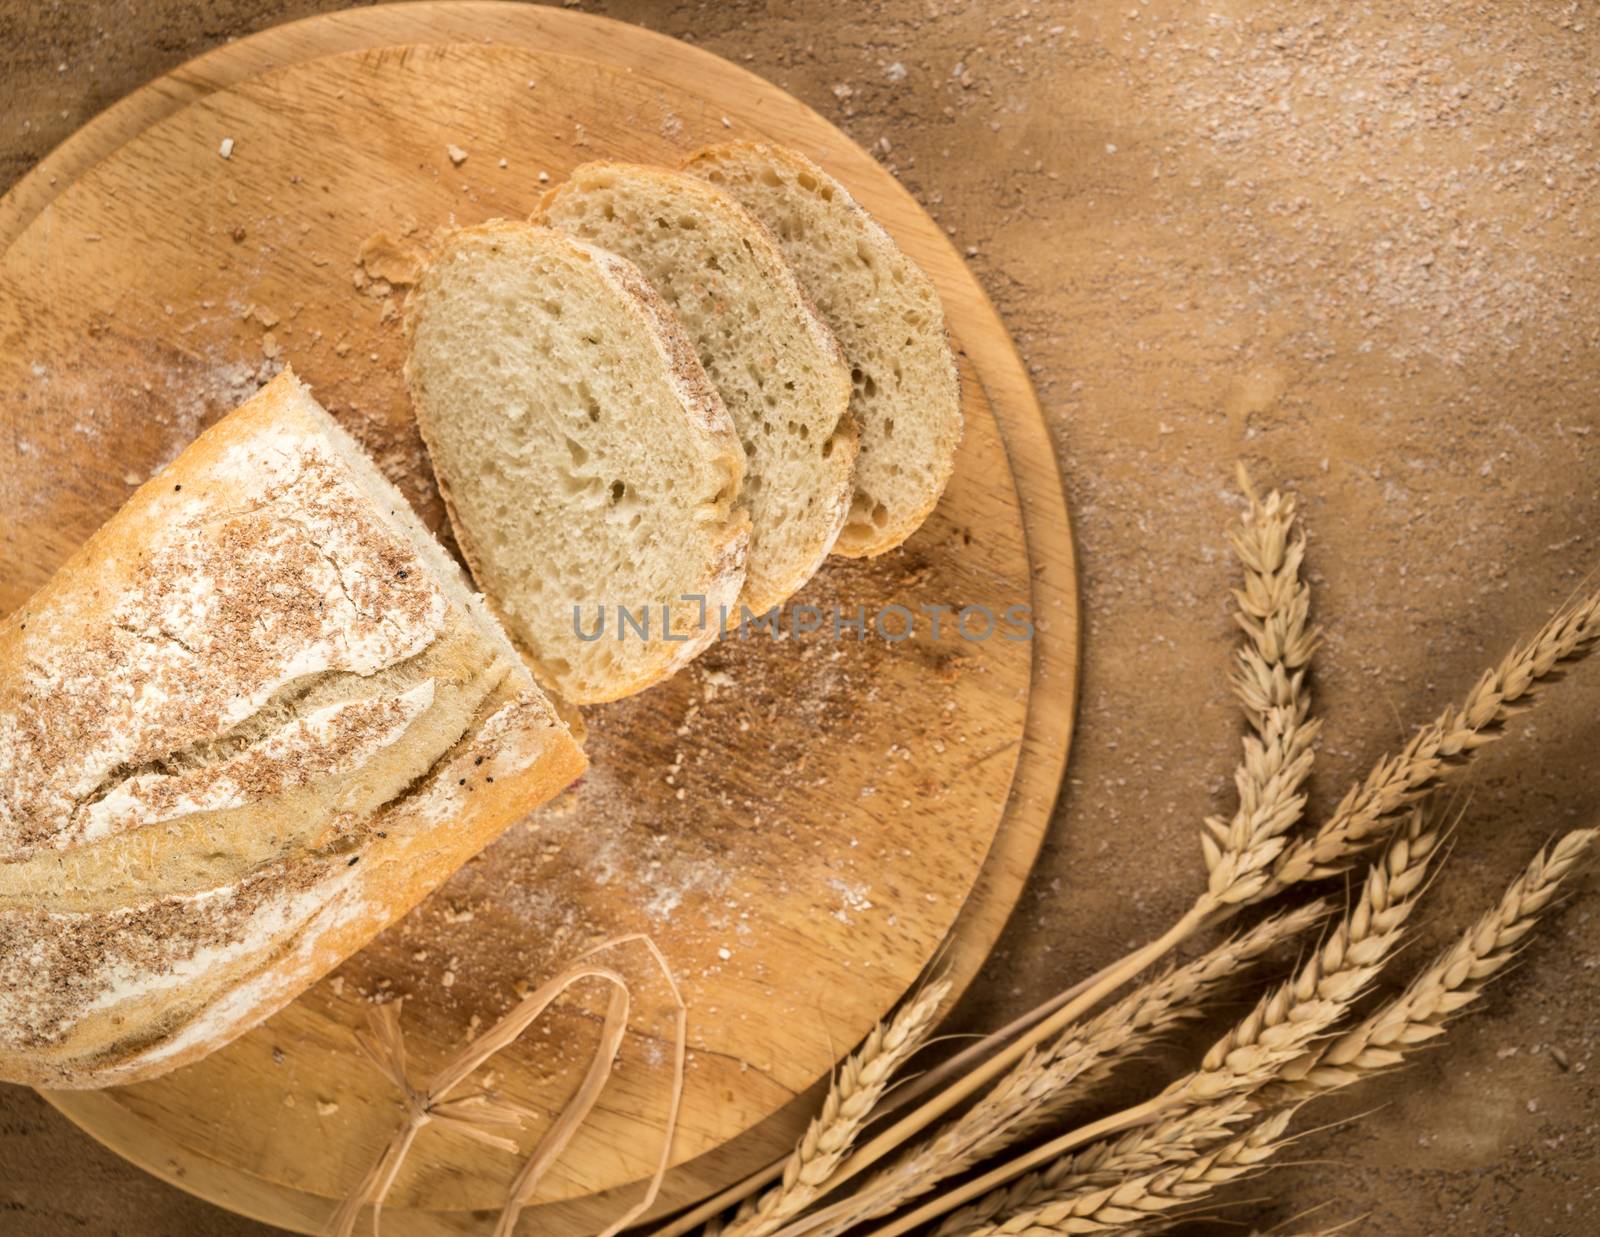 sliced bread on a round wooden tray with spikelets and crumbs